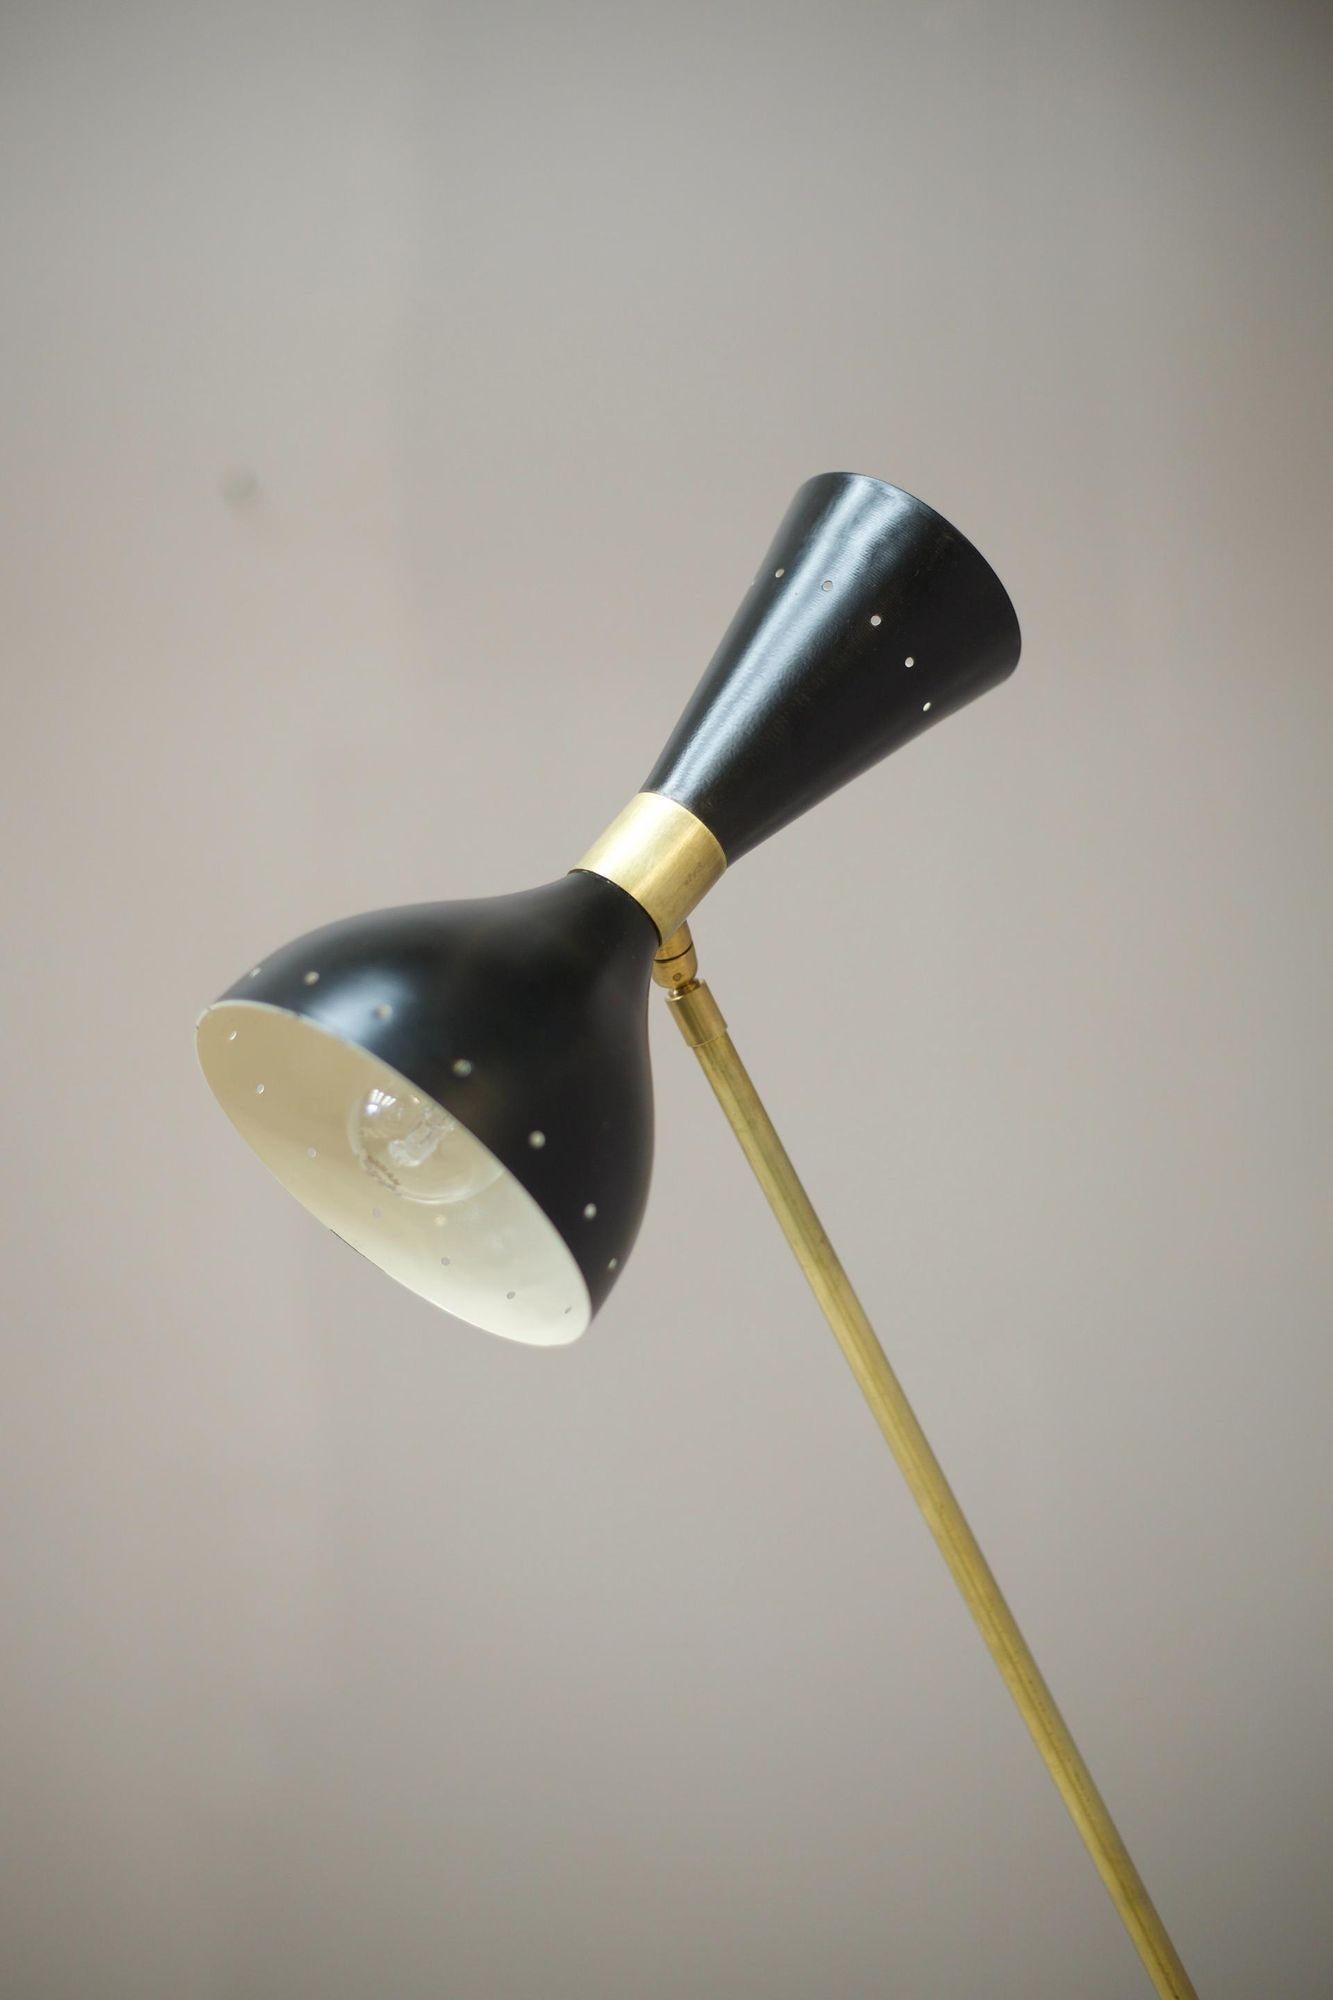 This is a very stylish mid century Italian floor lamp by Stilnovo. Made from brass with a black shade. The overall design is effortlessly stunning with its minimal profile and sleek nature. The support arm adjusts up and down and the lamp head can